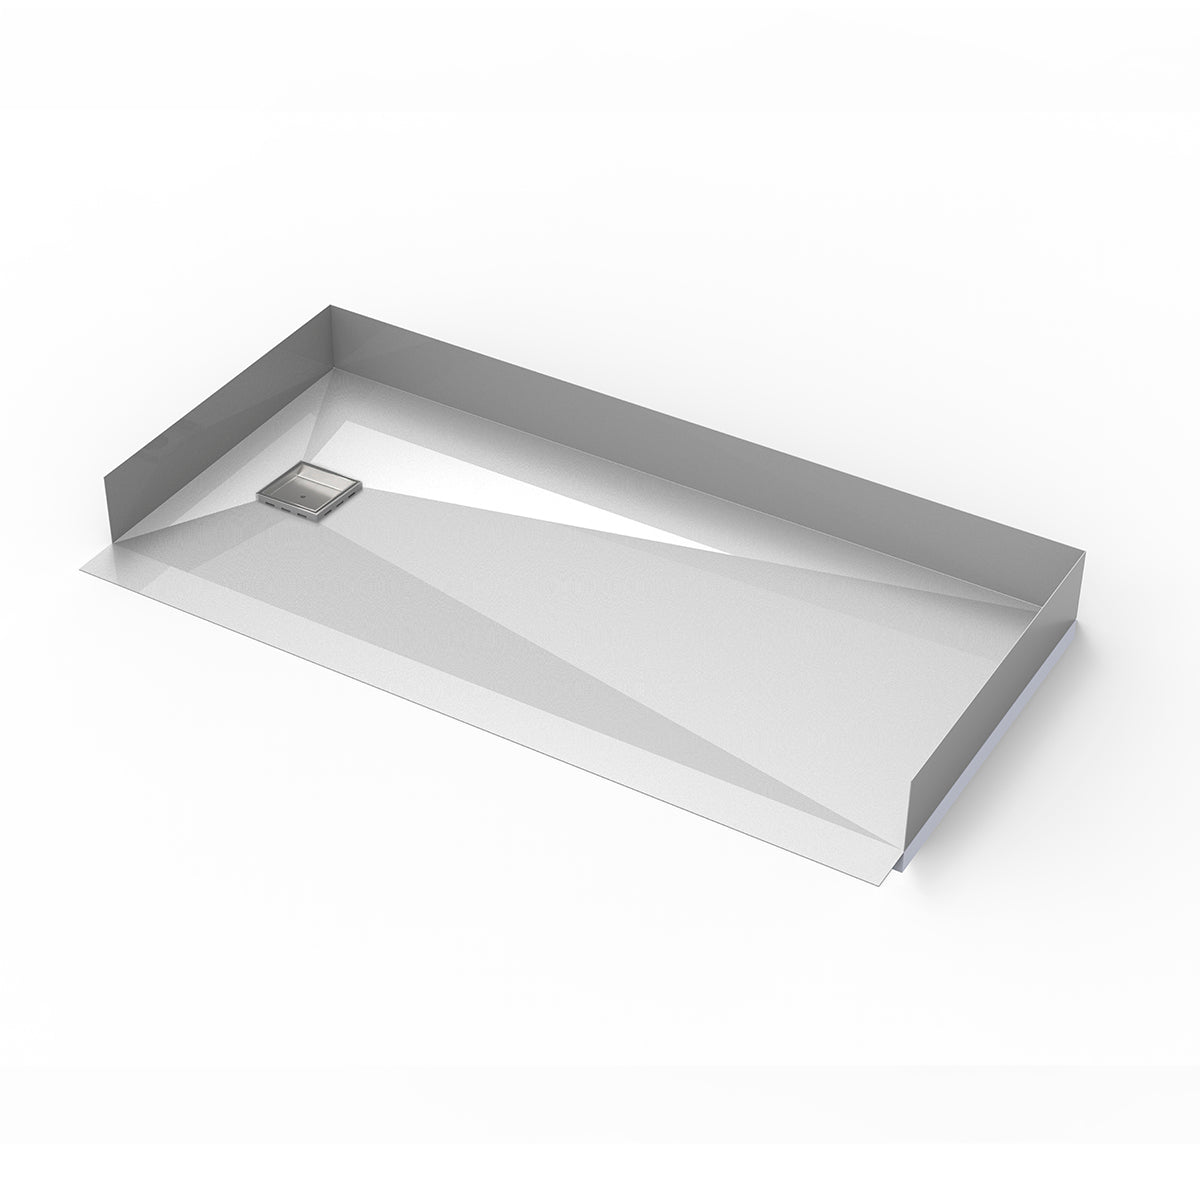 Infinity Drain 30"x 60" Curbless Stainless Steel Shower Base with Tile Insert Left Drain location